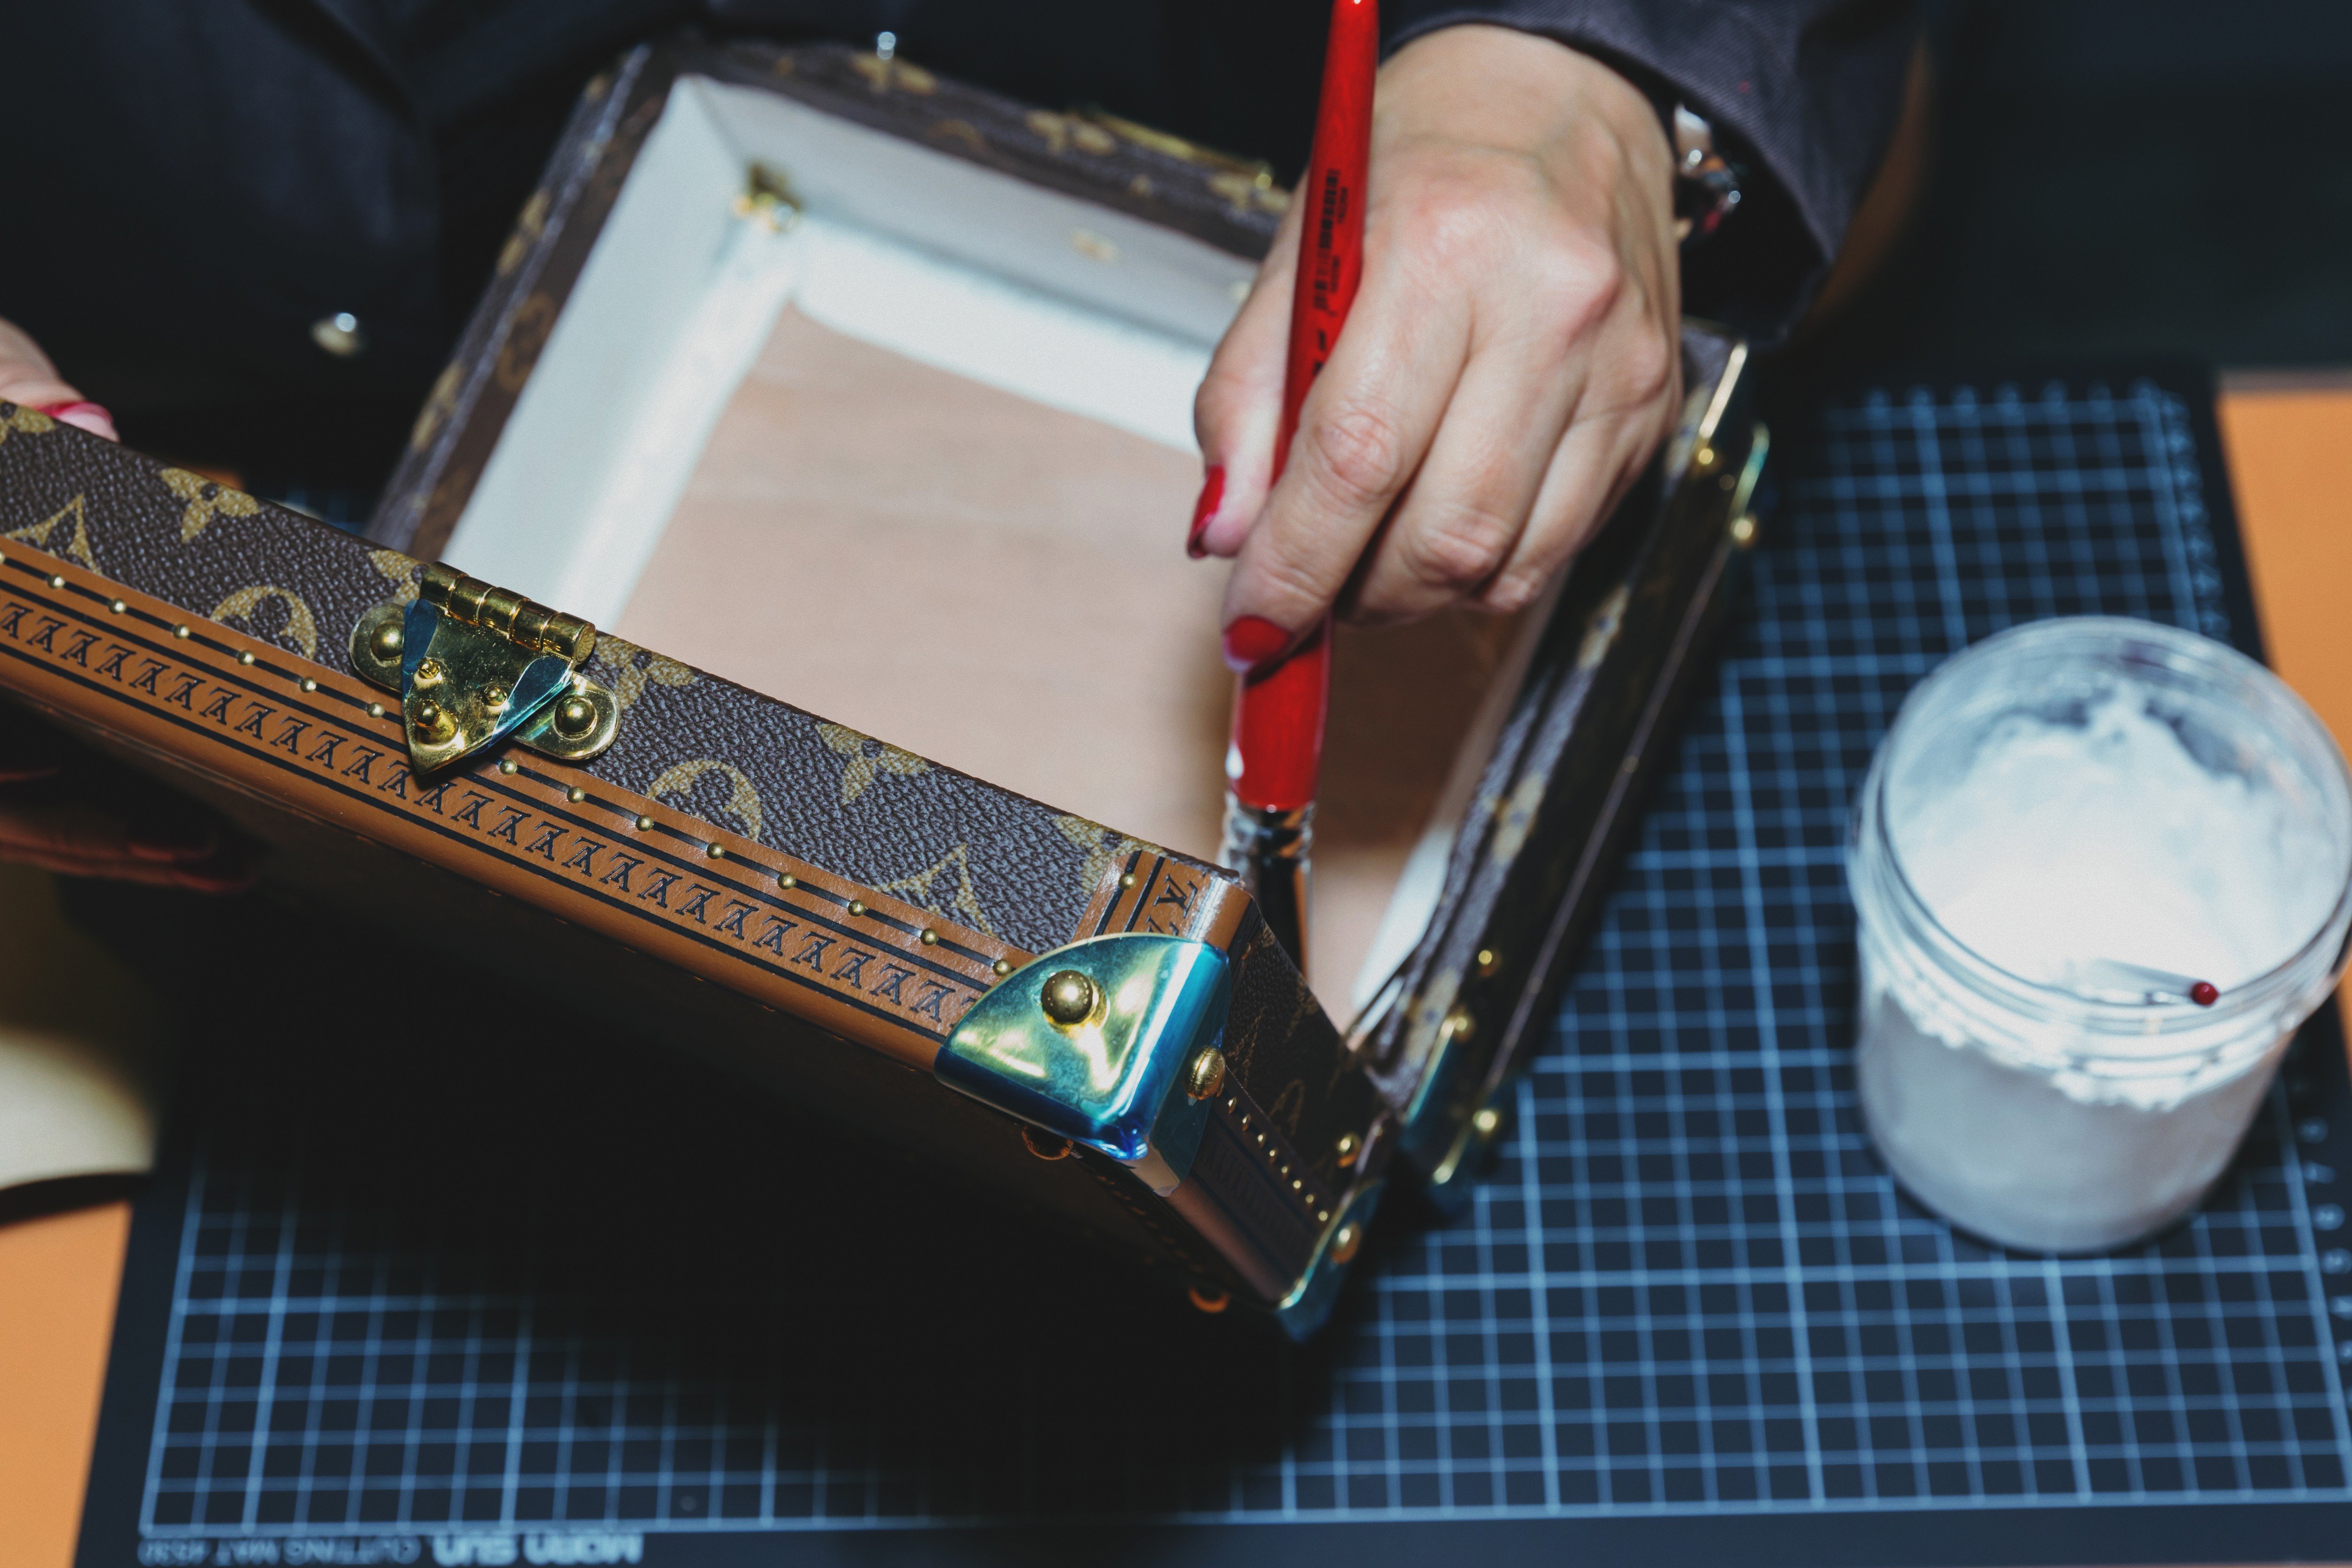 LOUIS VUITTON LAUNCHES “TIME CAPSULE” EXHIBITION IN OLD ASNIÈRES WORKS –  SEVENTEENTHEBRAND